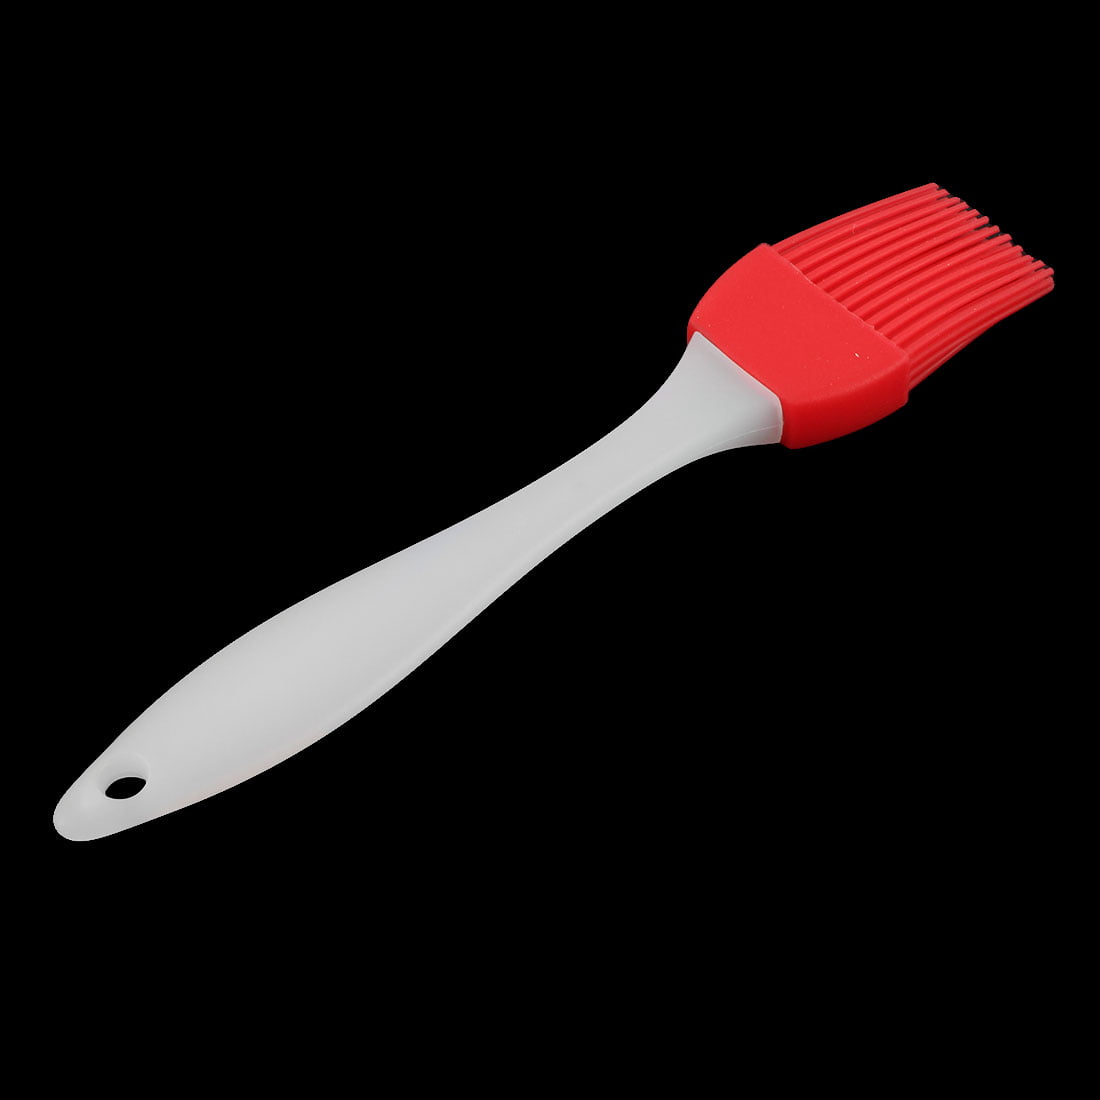 HUBERT® Red Silicone Pastry Brush with Black Plastic Handle - 8 1